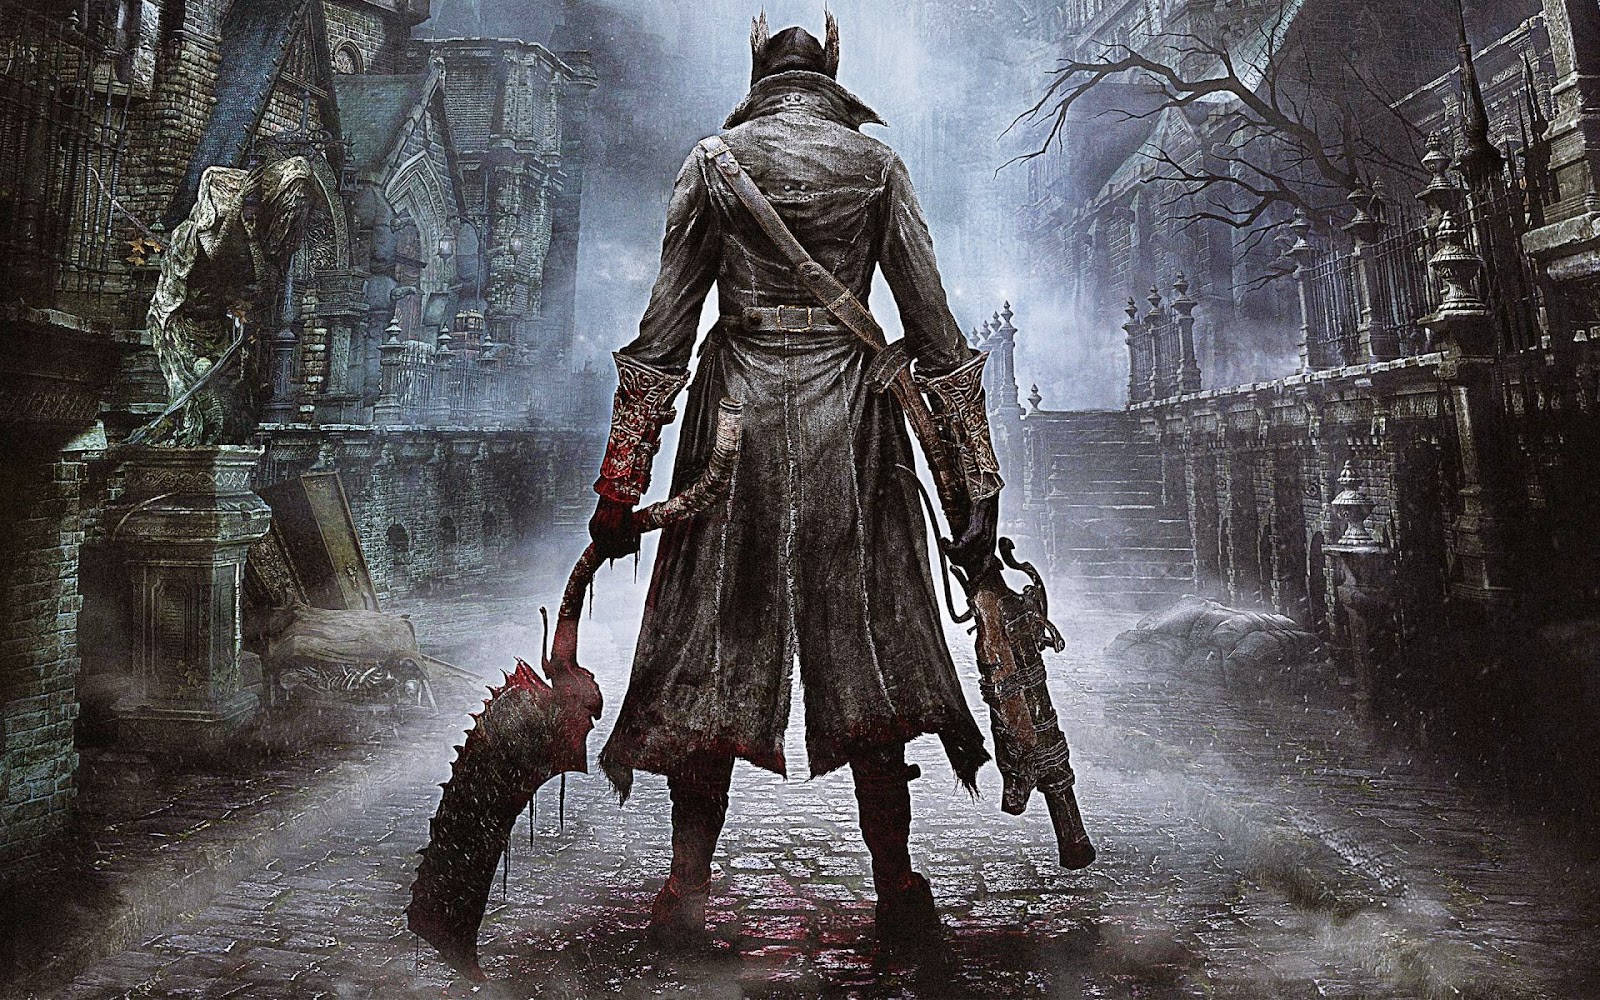 Bloodborne's Nightmare Edition Not Coming to North America